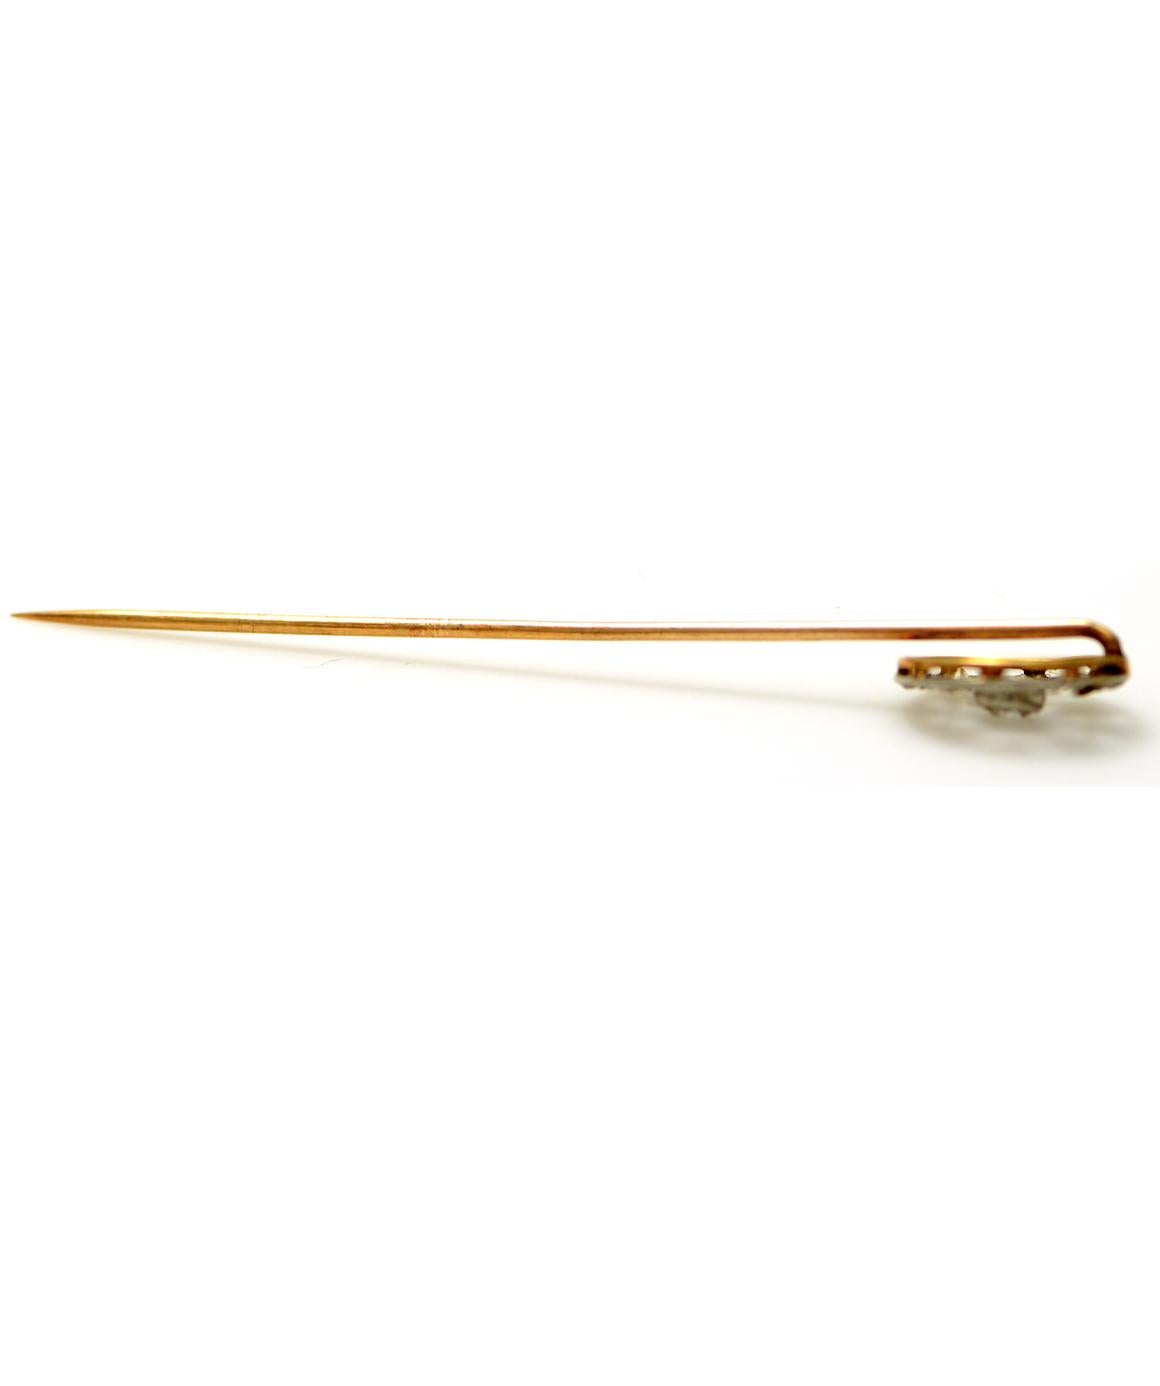 Solid 14K White & Yellow Gold Antique Natural Diamond Stick Pin 1.7g
Excellent condition! This solid 14k two-tone gold stick pin features 9 natural old mine cut diamonds. The center diamond weighs approximately 0.20ct and the additional 8 weigh